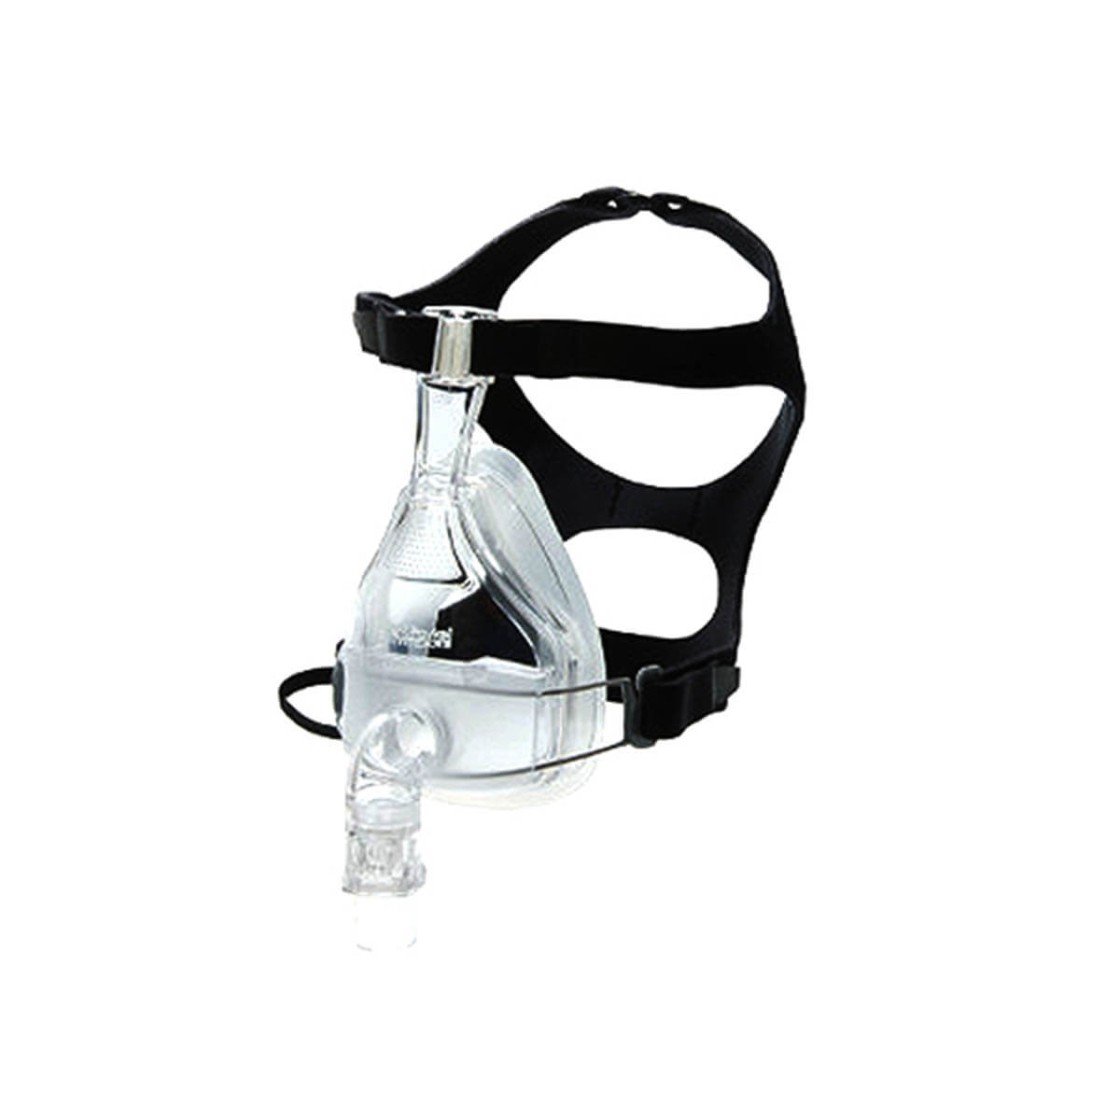 Fisher & Paykel FlexiFit 431 Full Face Mask : 30-NIGHT Risk Free Trial :  Ships Free